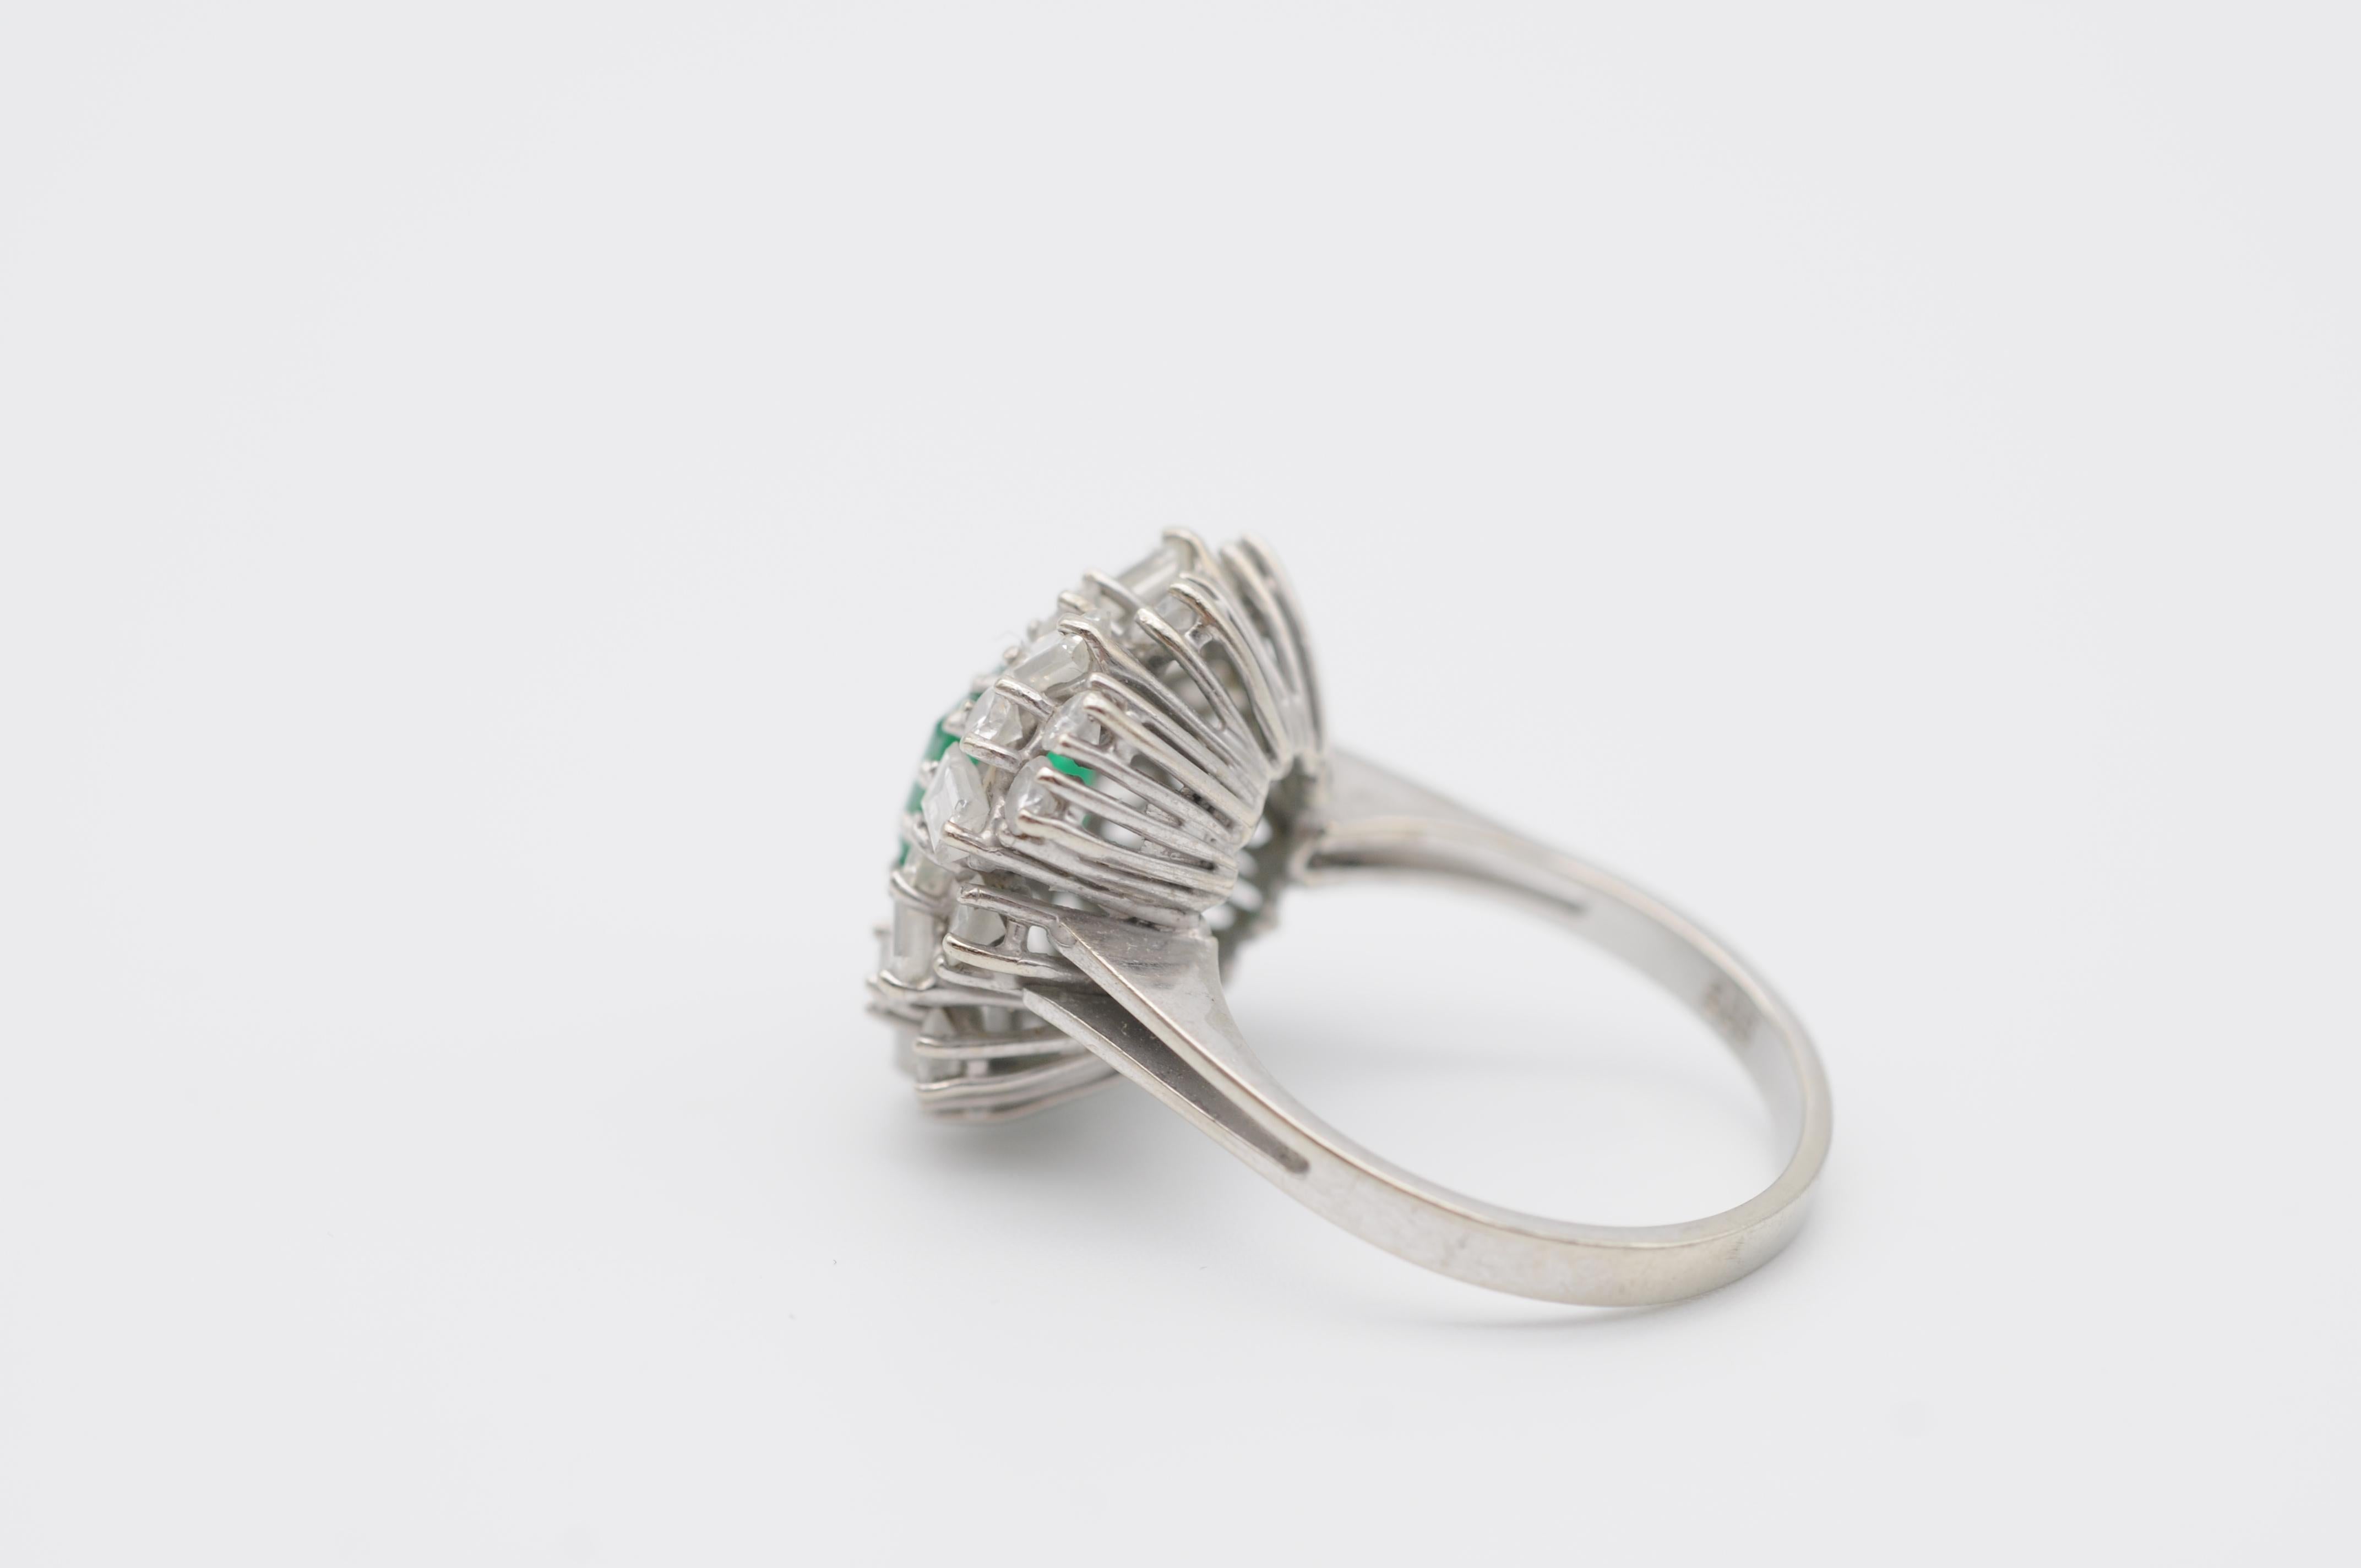  Emerald cluster Ring with Diamonds in 14k white gold For Sale 9